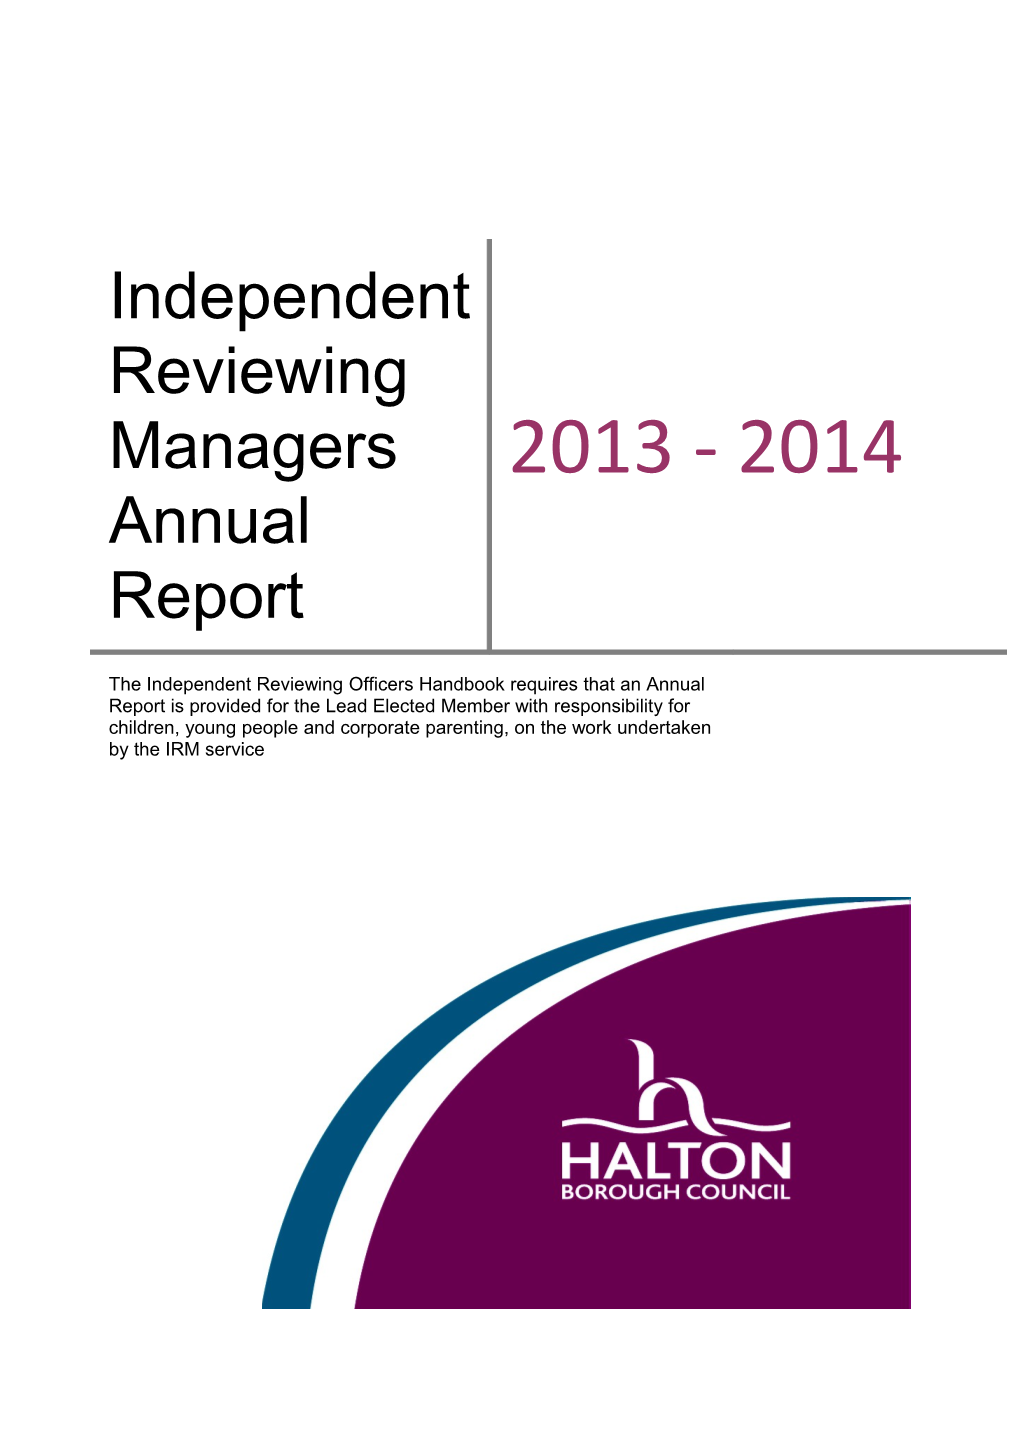 Independent Reviewing Managers Annual Report